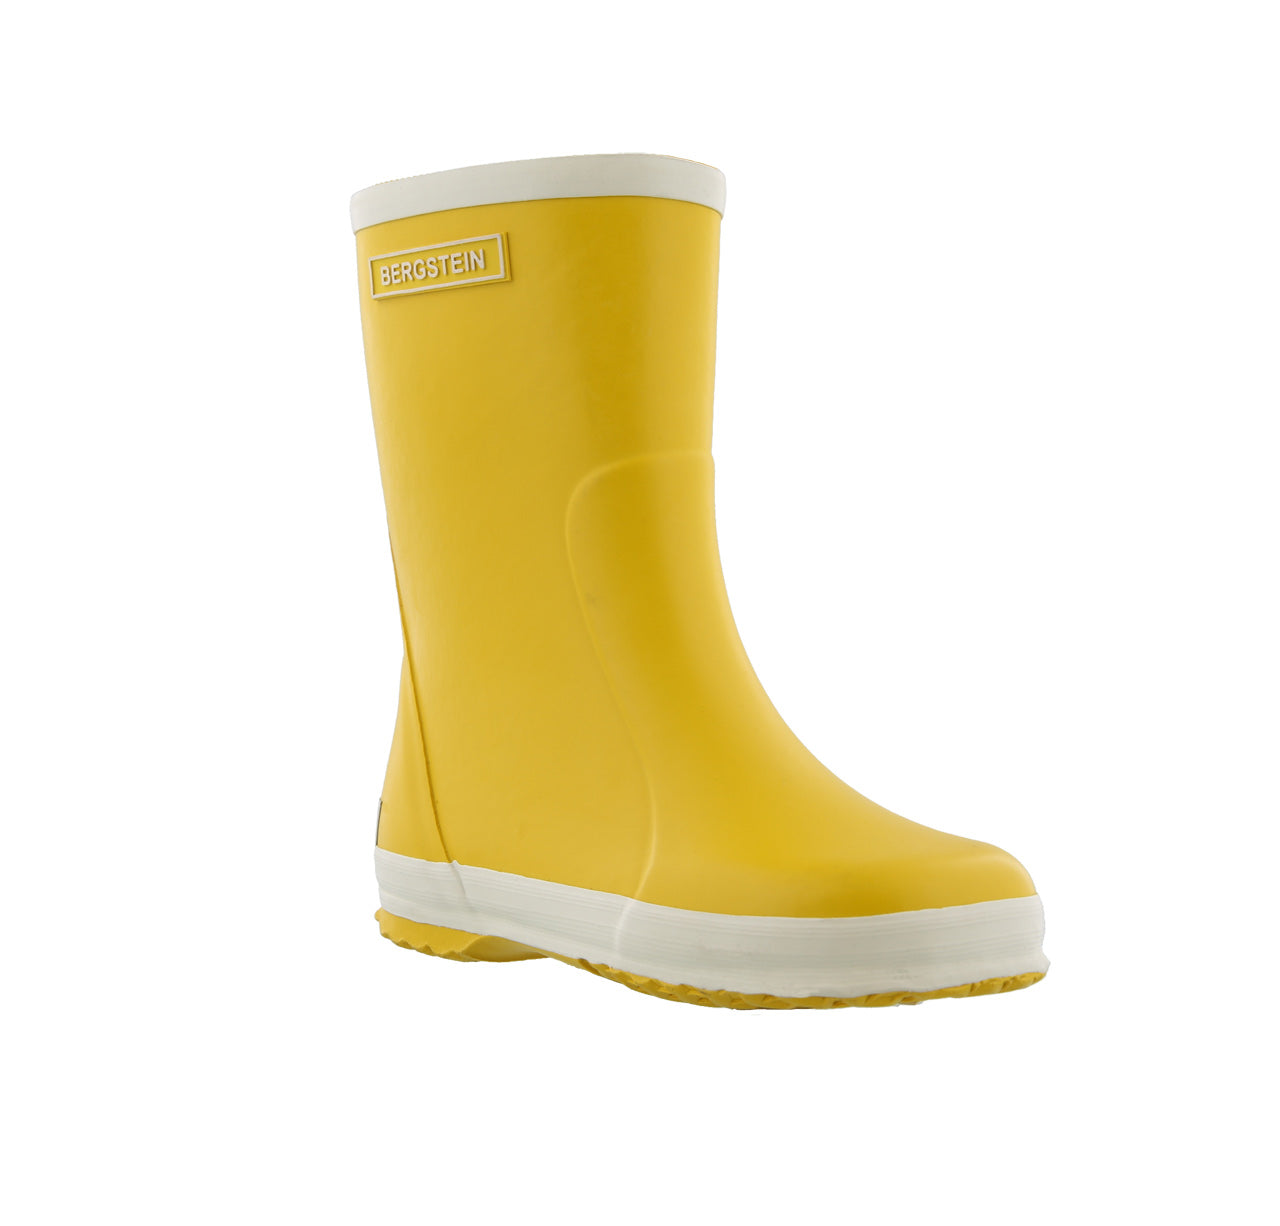 Natural Rubber Gumboots - Yellow (31 only) *Last One!